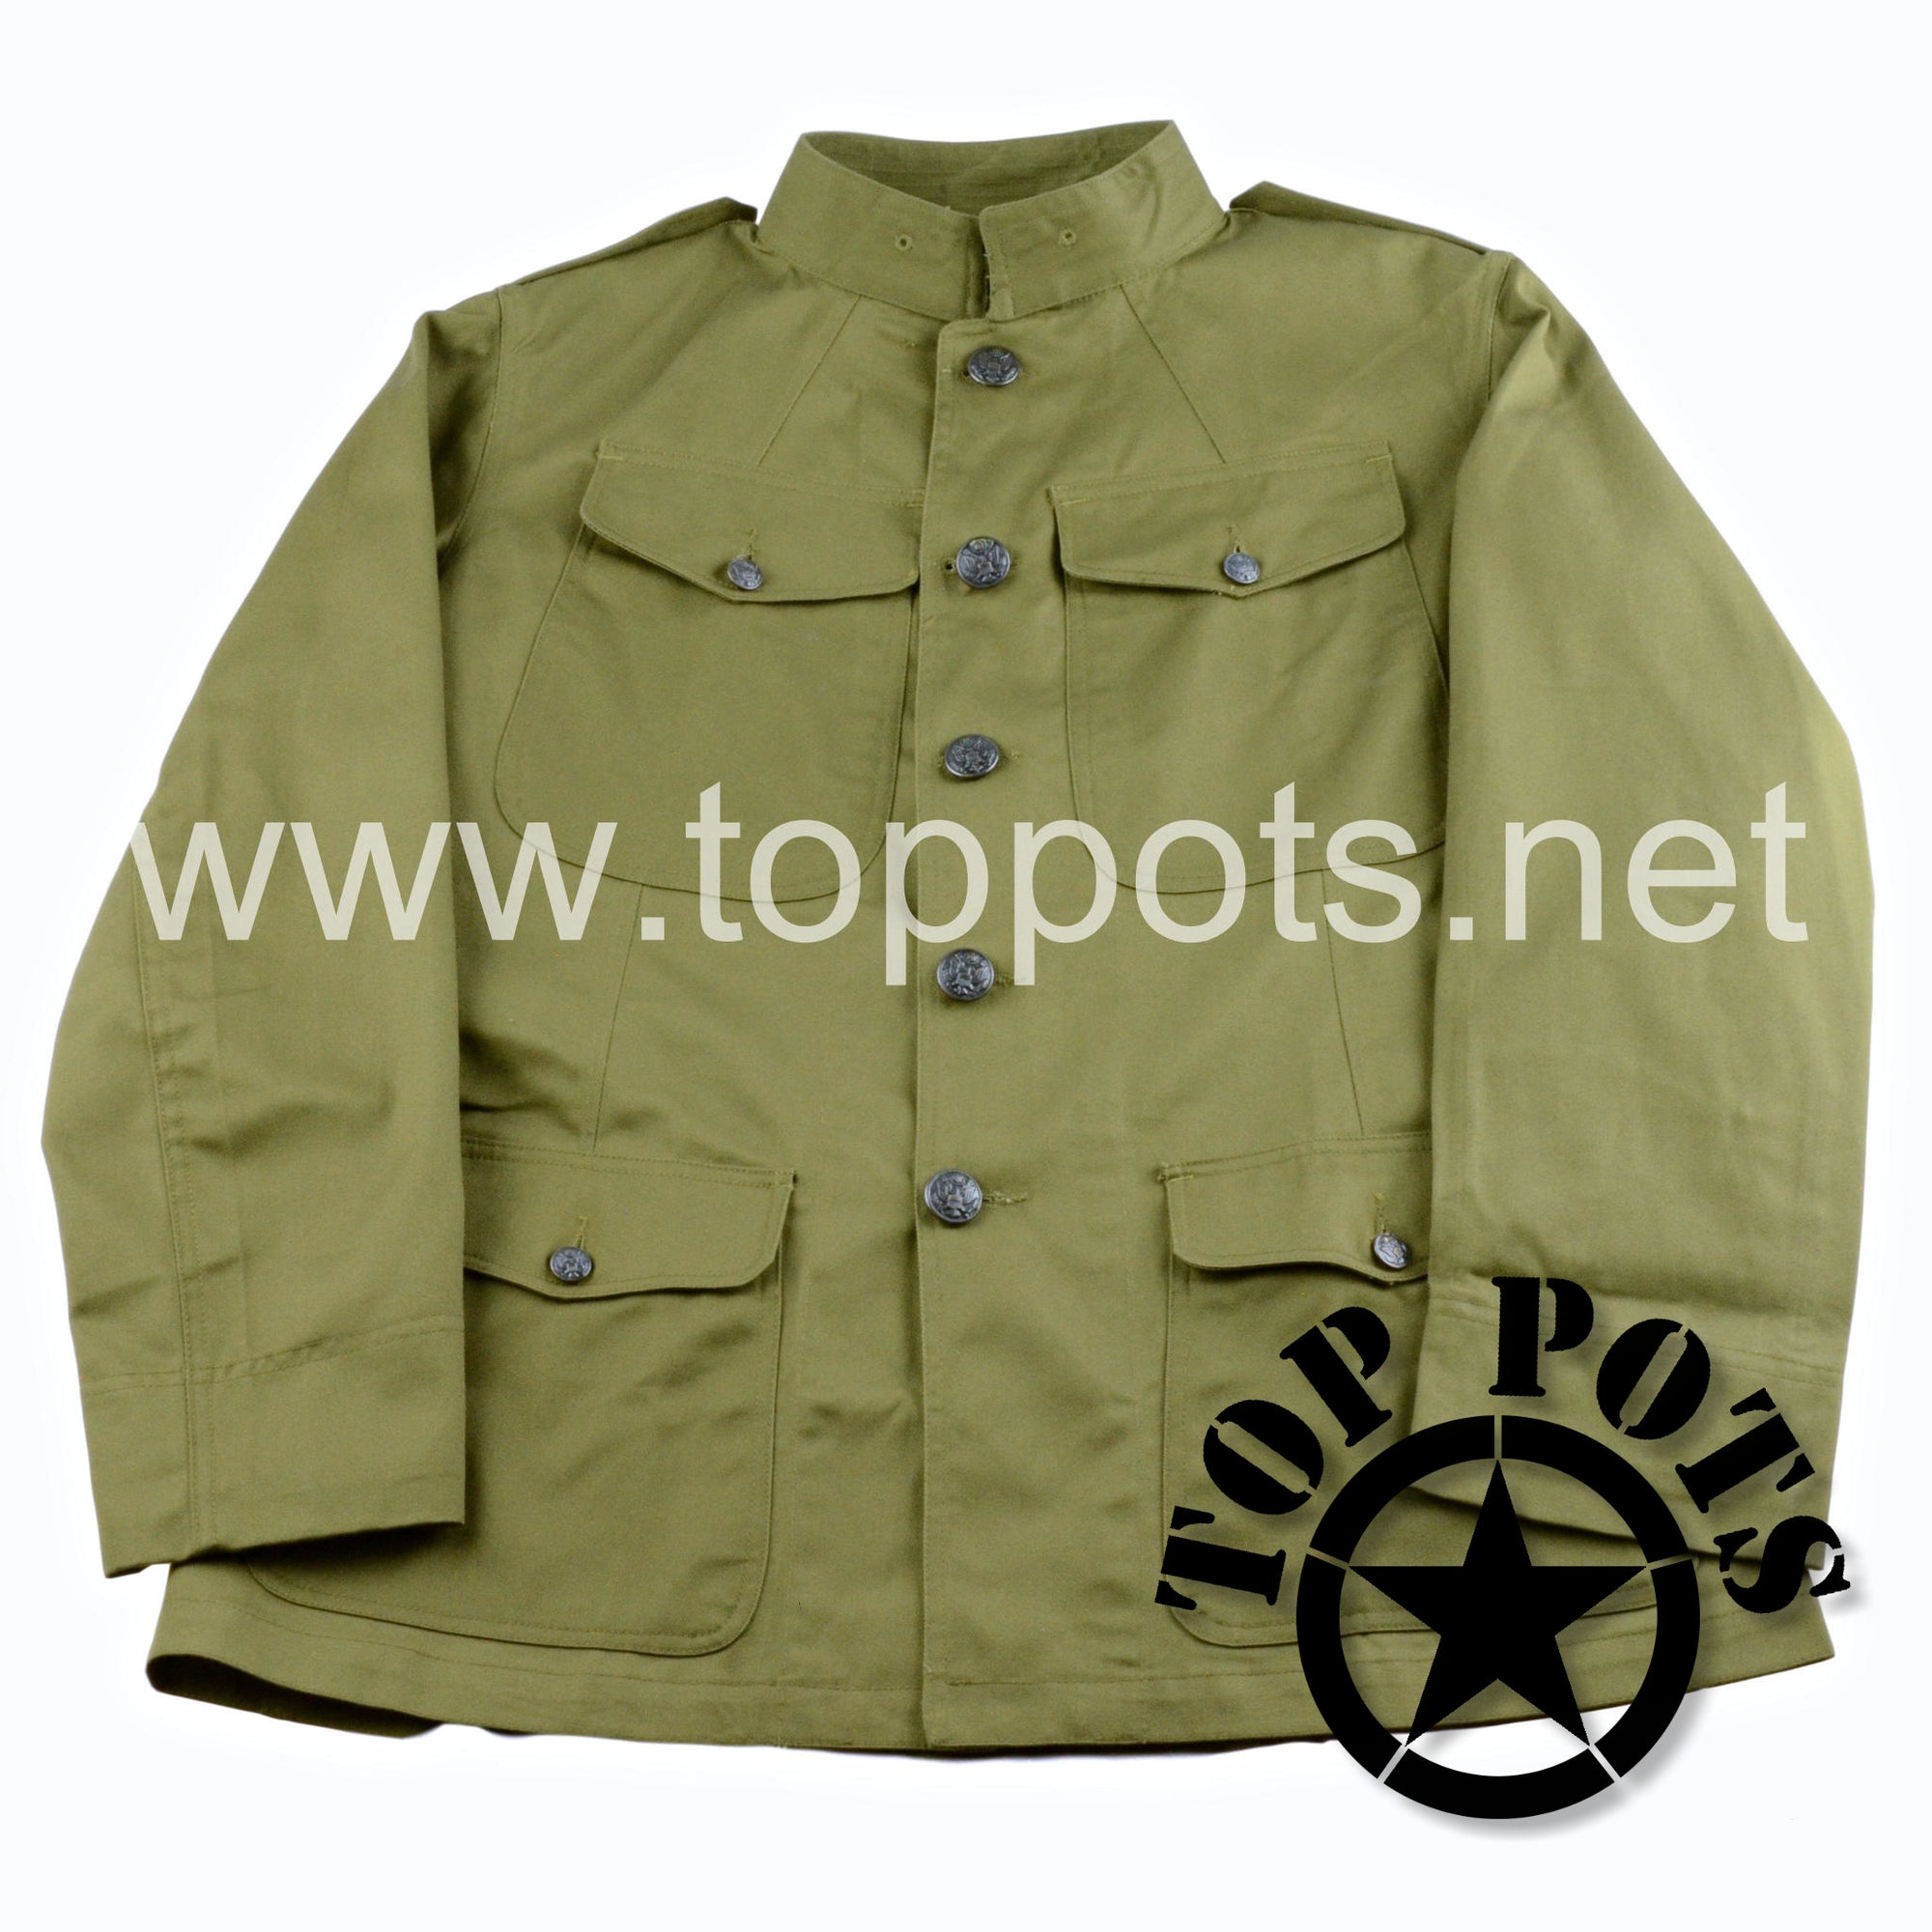 WWI US Army Reproduction American Doughboy M1912 Cotton Enlisted Summer Uniform Jacket and Pant Purchase (12 Sets)